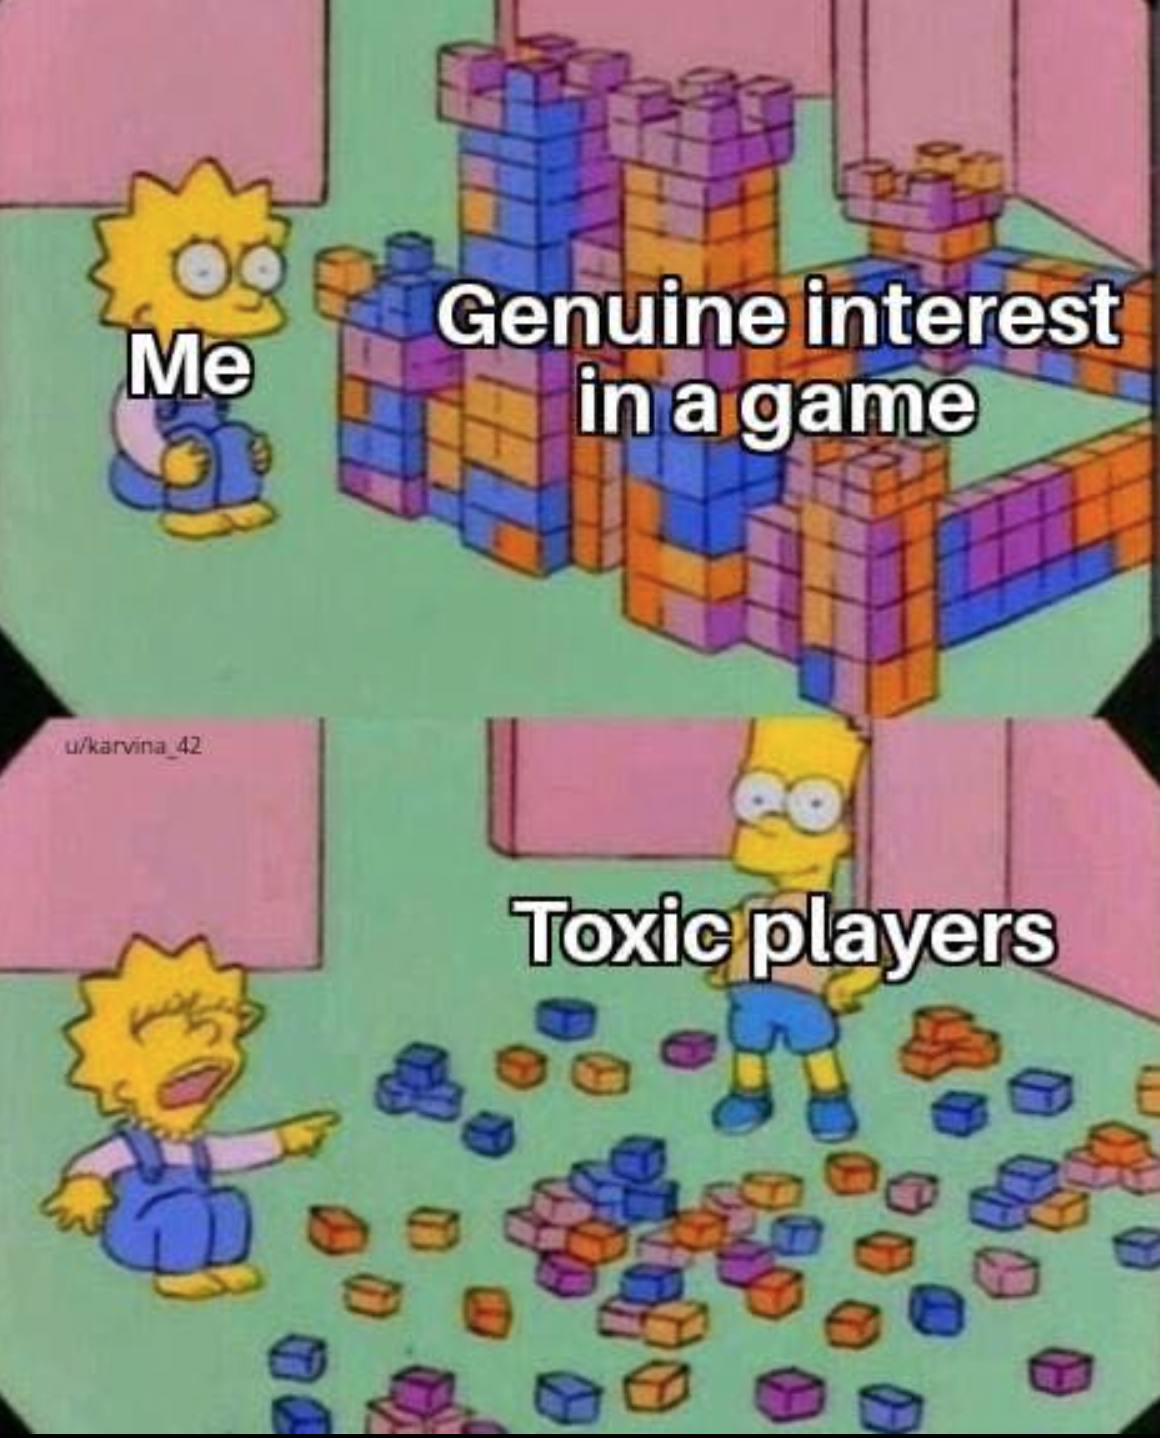 kurzgesagt memes - Me Genuine interest in a game arvina 2 Toxic players